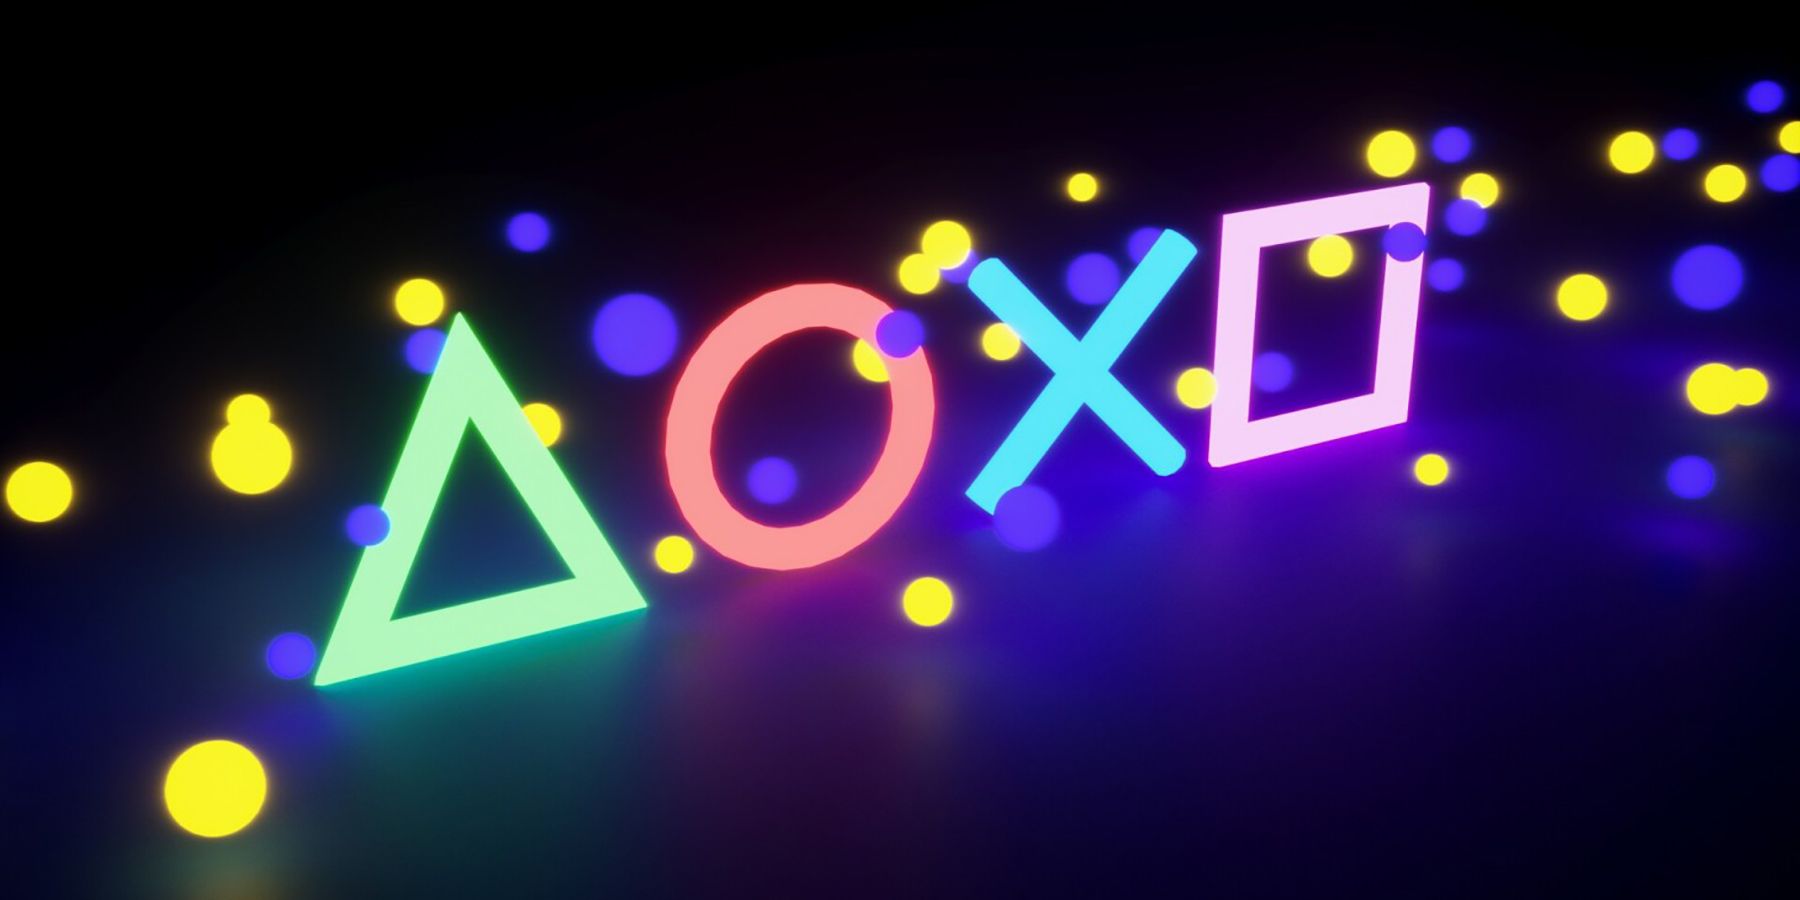 PlayStation Showcase Recap And Discussion: Everything You Need To Know! 